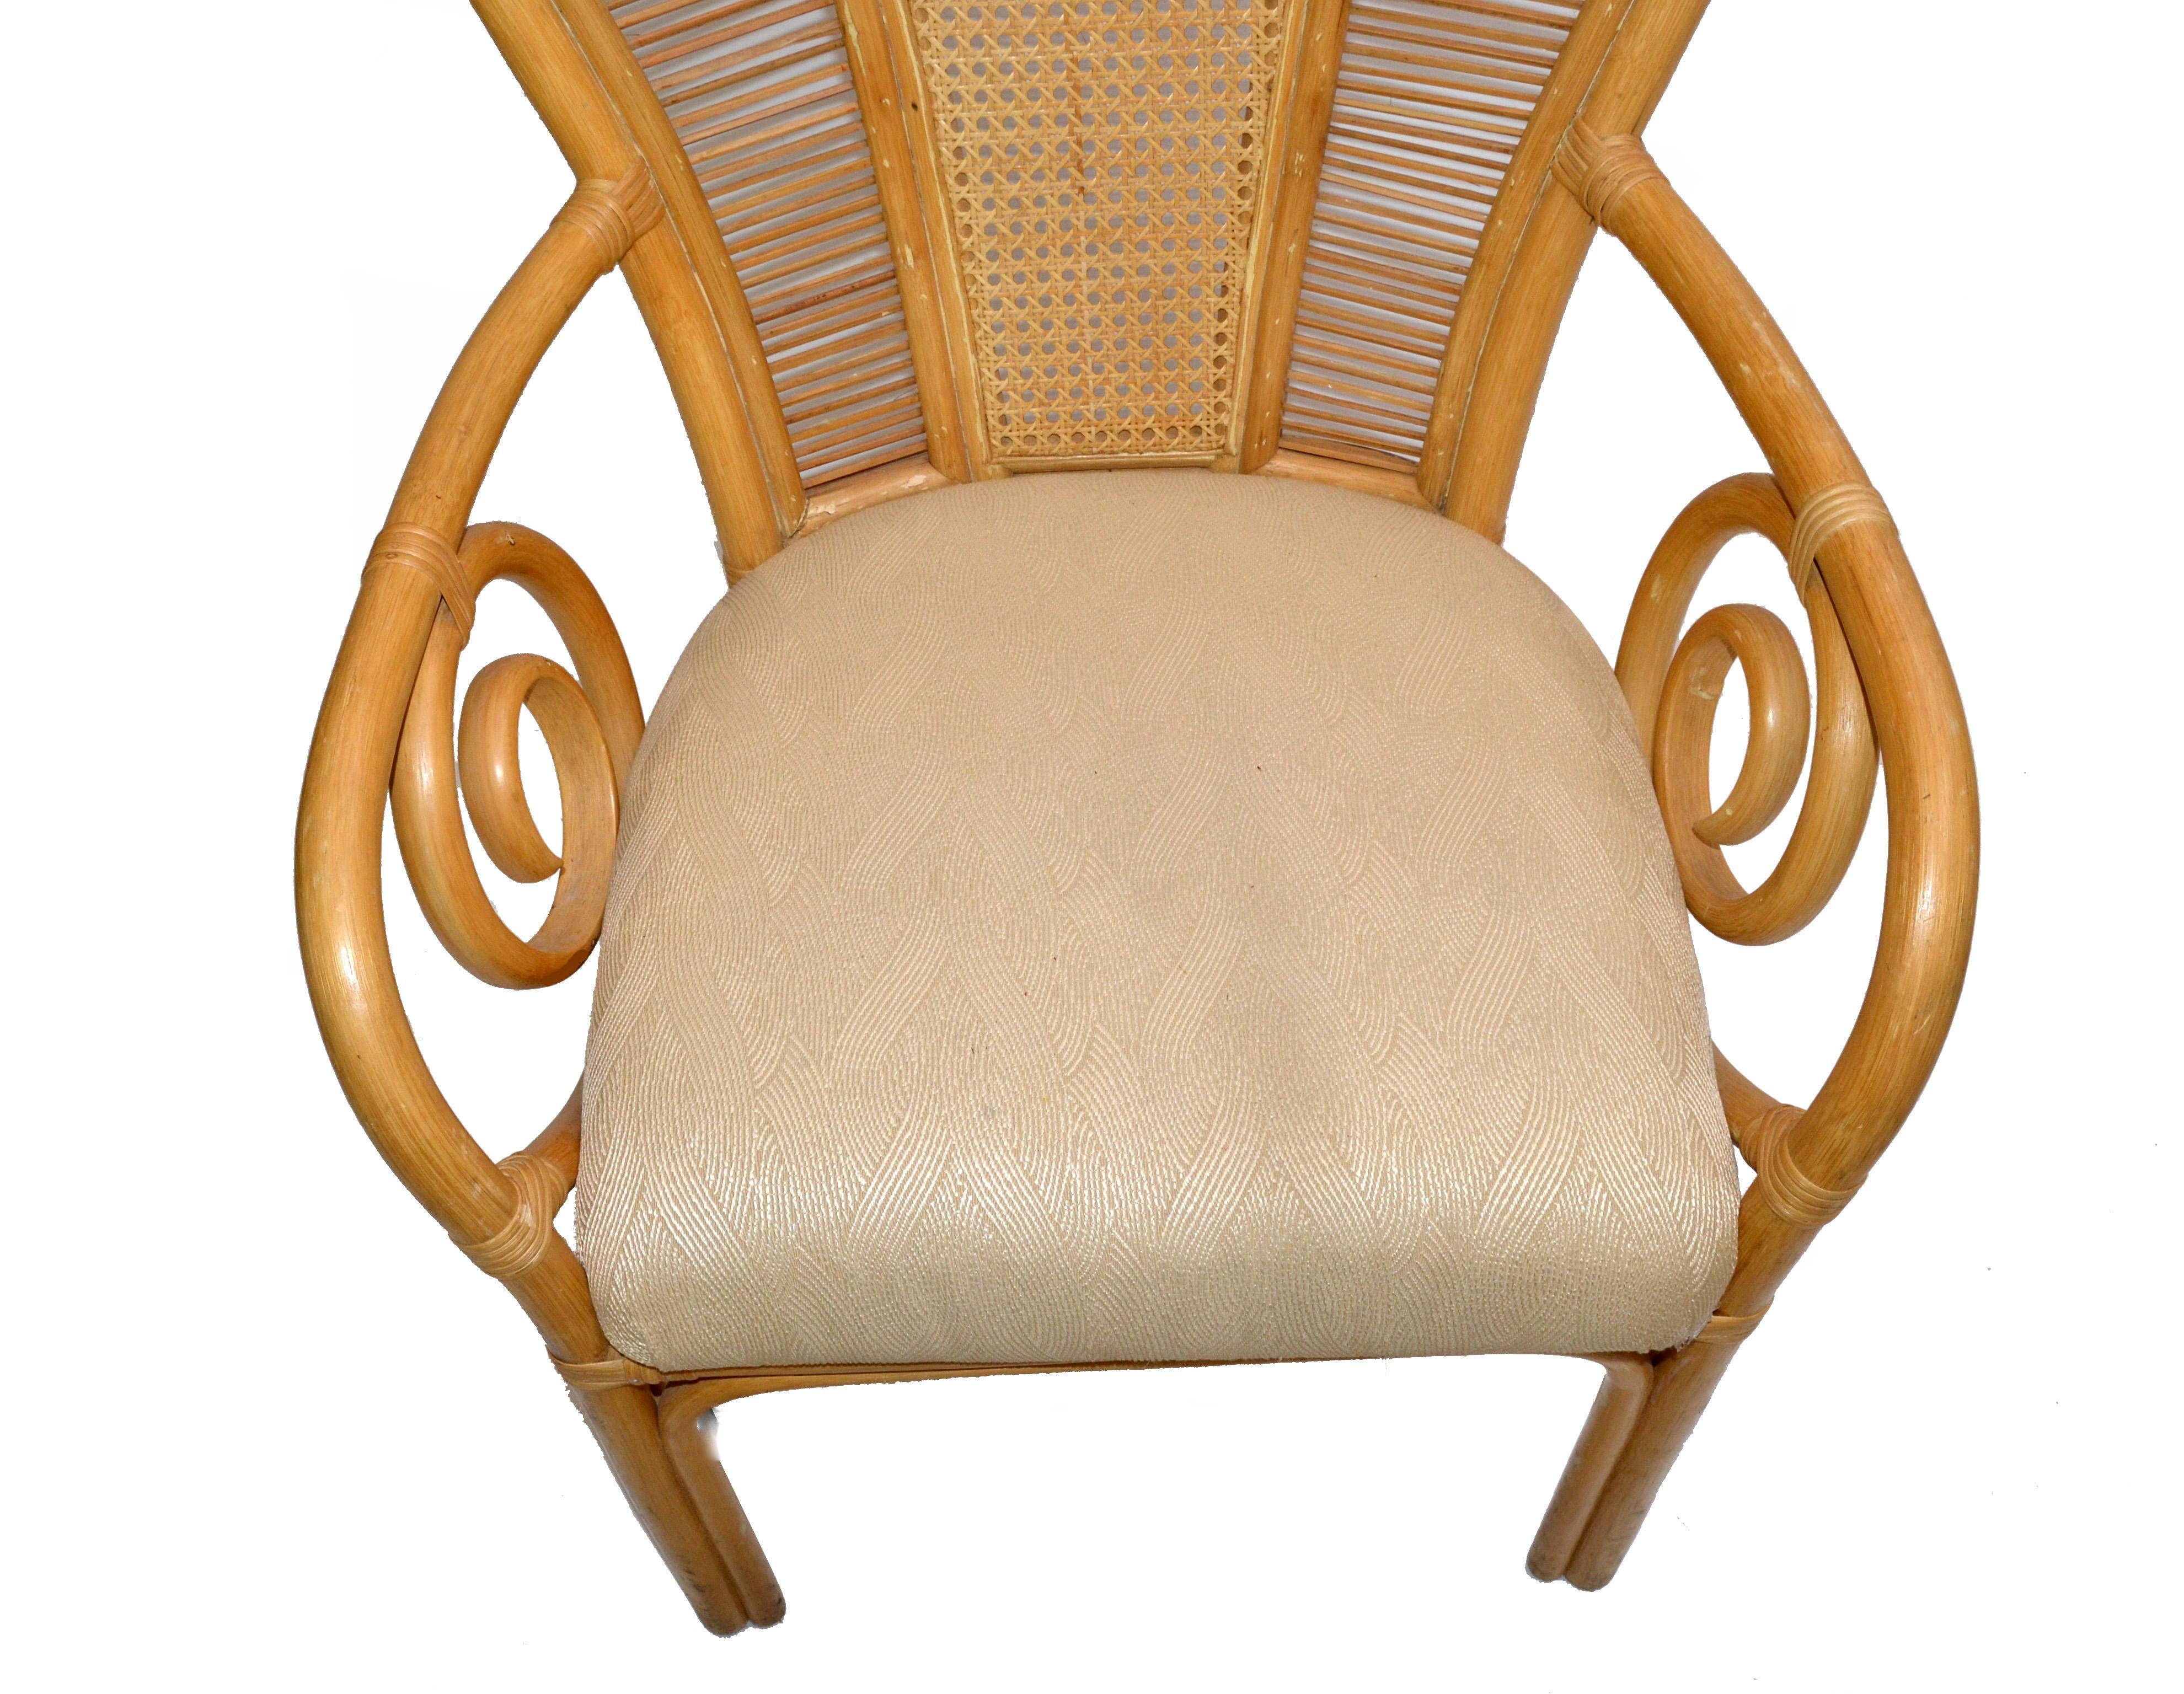 Hand-Crafted Bohemian Chic Cane, Rattan, Bamboo & Fabric Seat Peacock High Back Chair 1980s